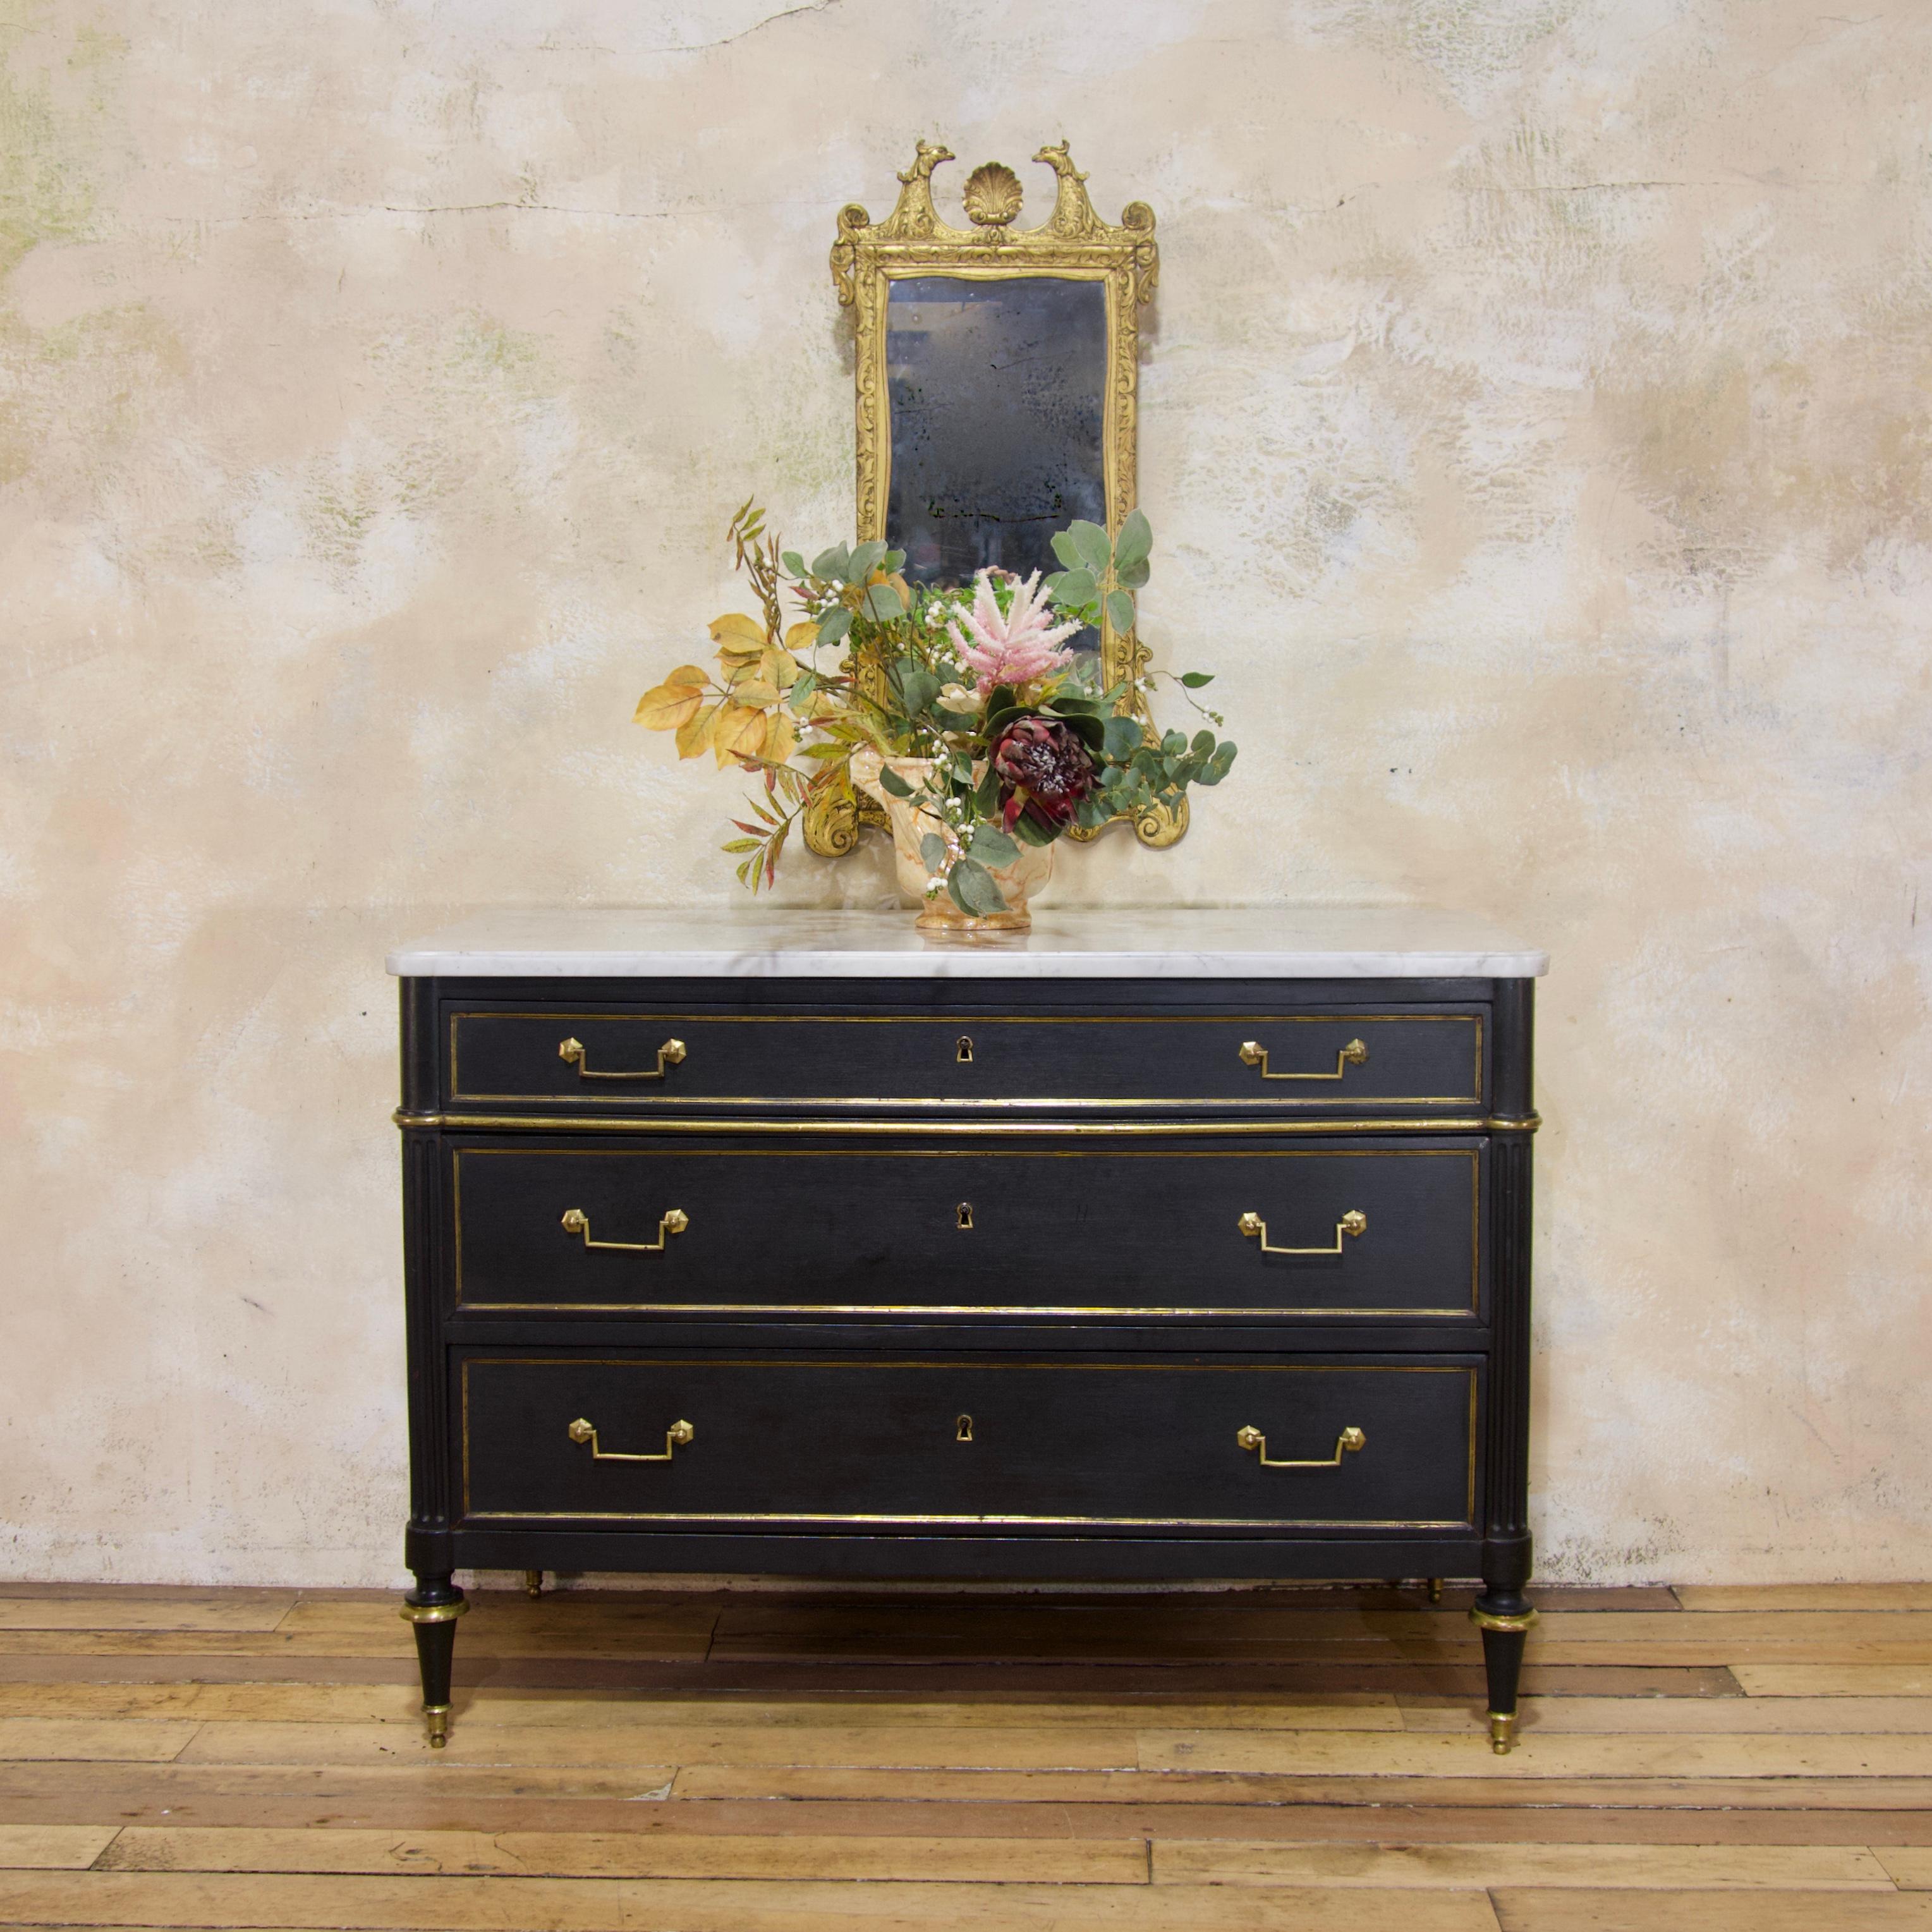 A large scale, late 19th century Louis XVI style three-drawer commode.  Of elegant proportions, featuring original brass mounts and thick Carrara marble top - displaying a beveled edge and rounded front corners. Raised on turned feet, with brass